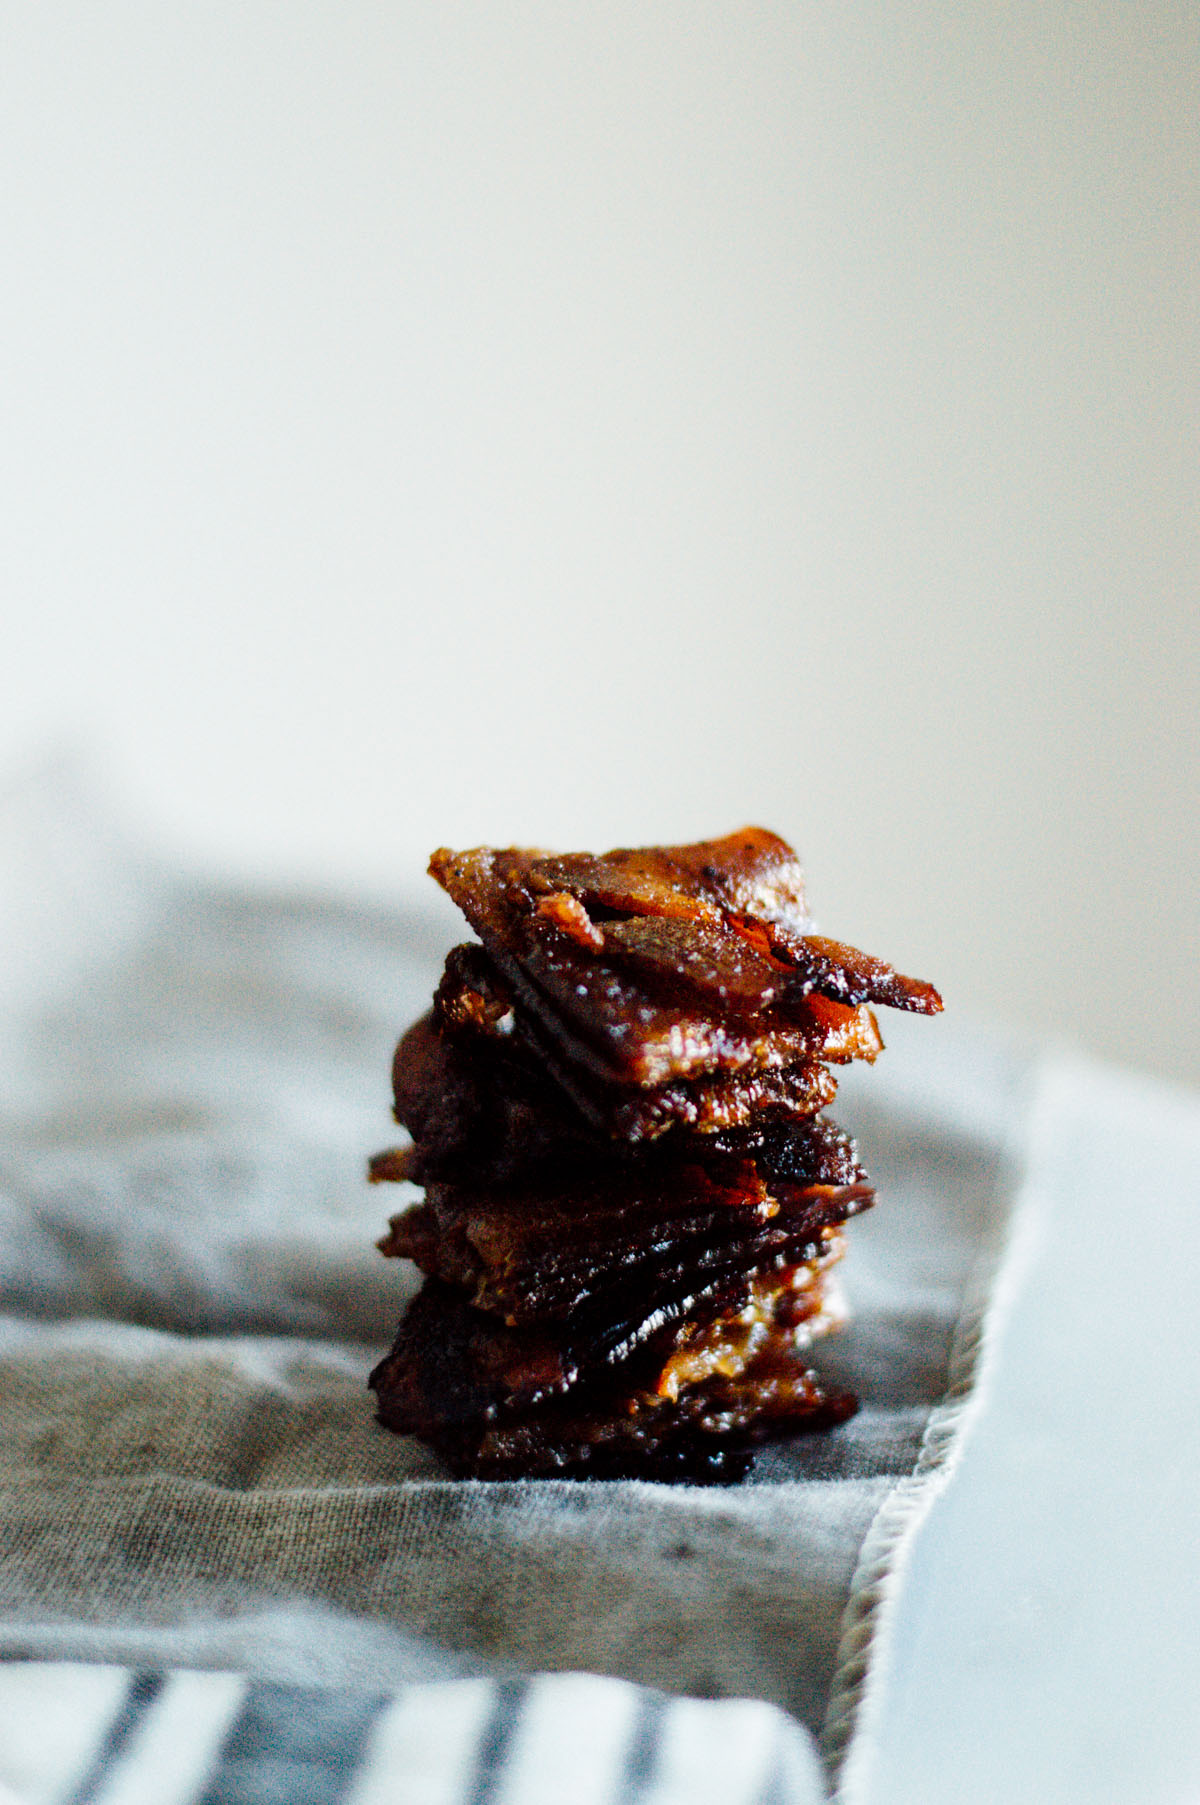 Candied bacon, yes please! Here's a fall cocktail recipe to use your bacon in - the Maple Bourbon Apple Cider | bygabriella.co